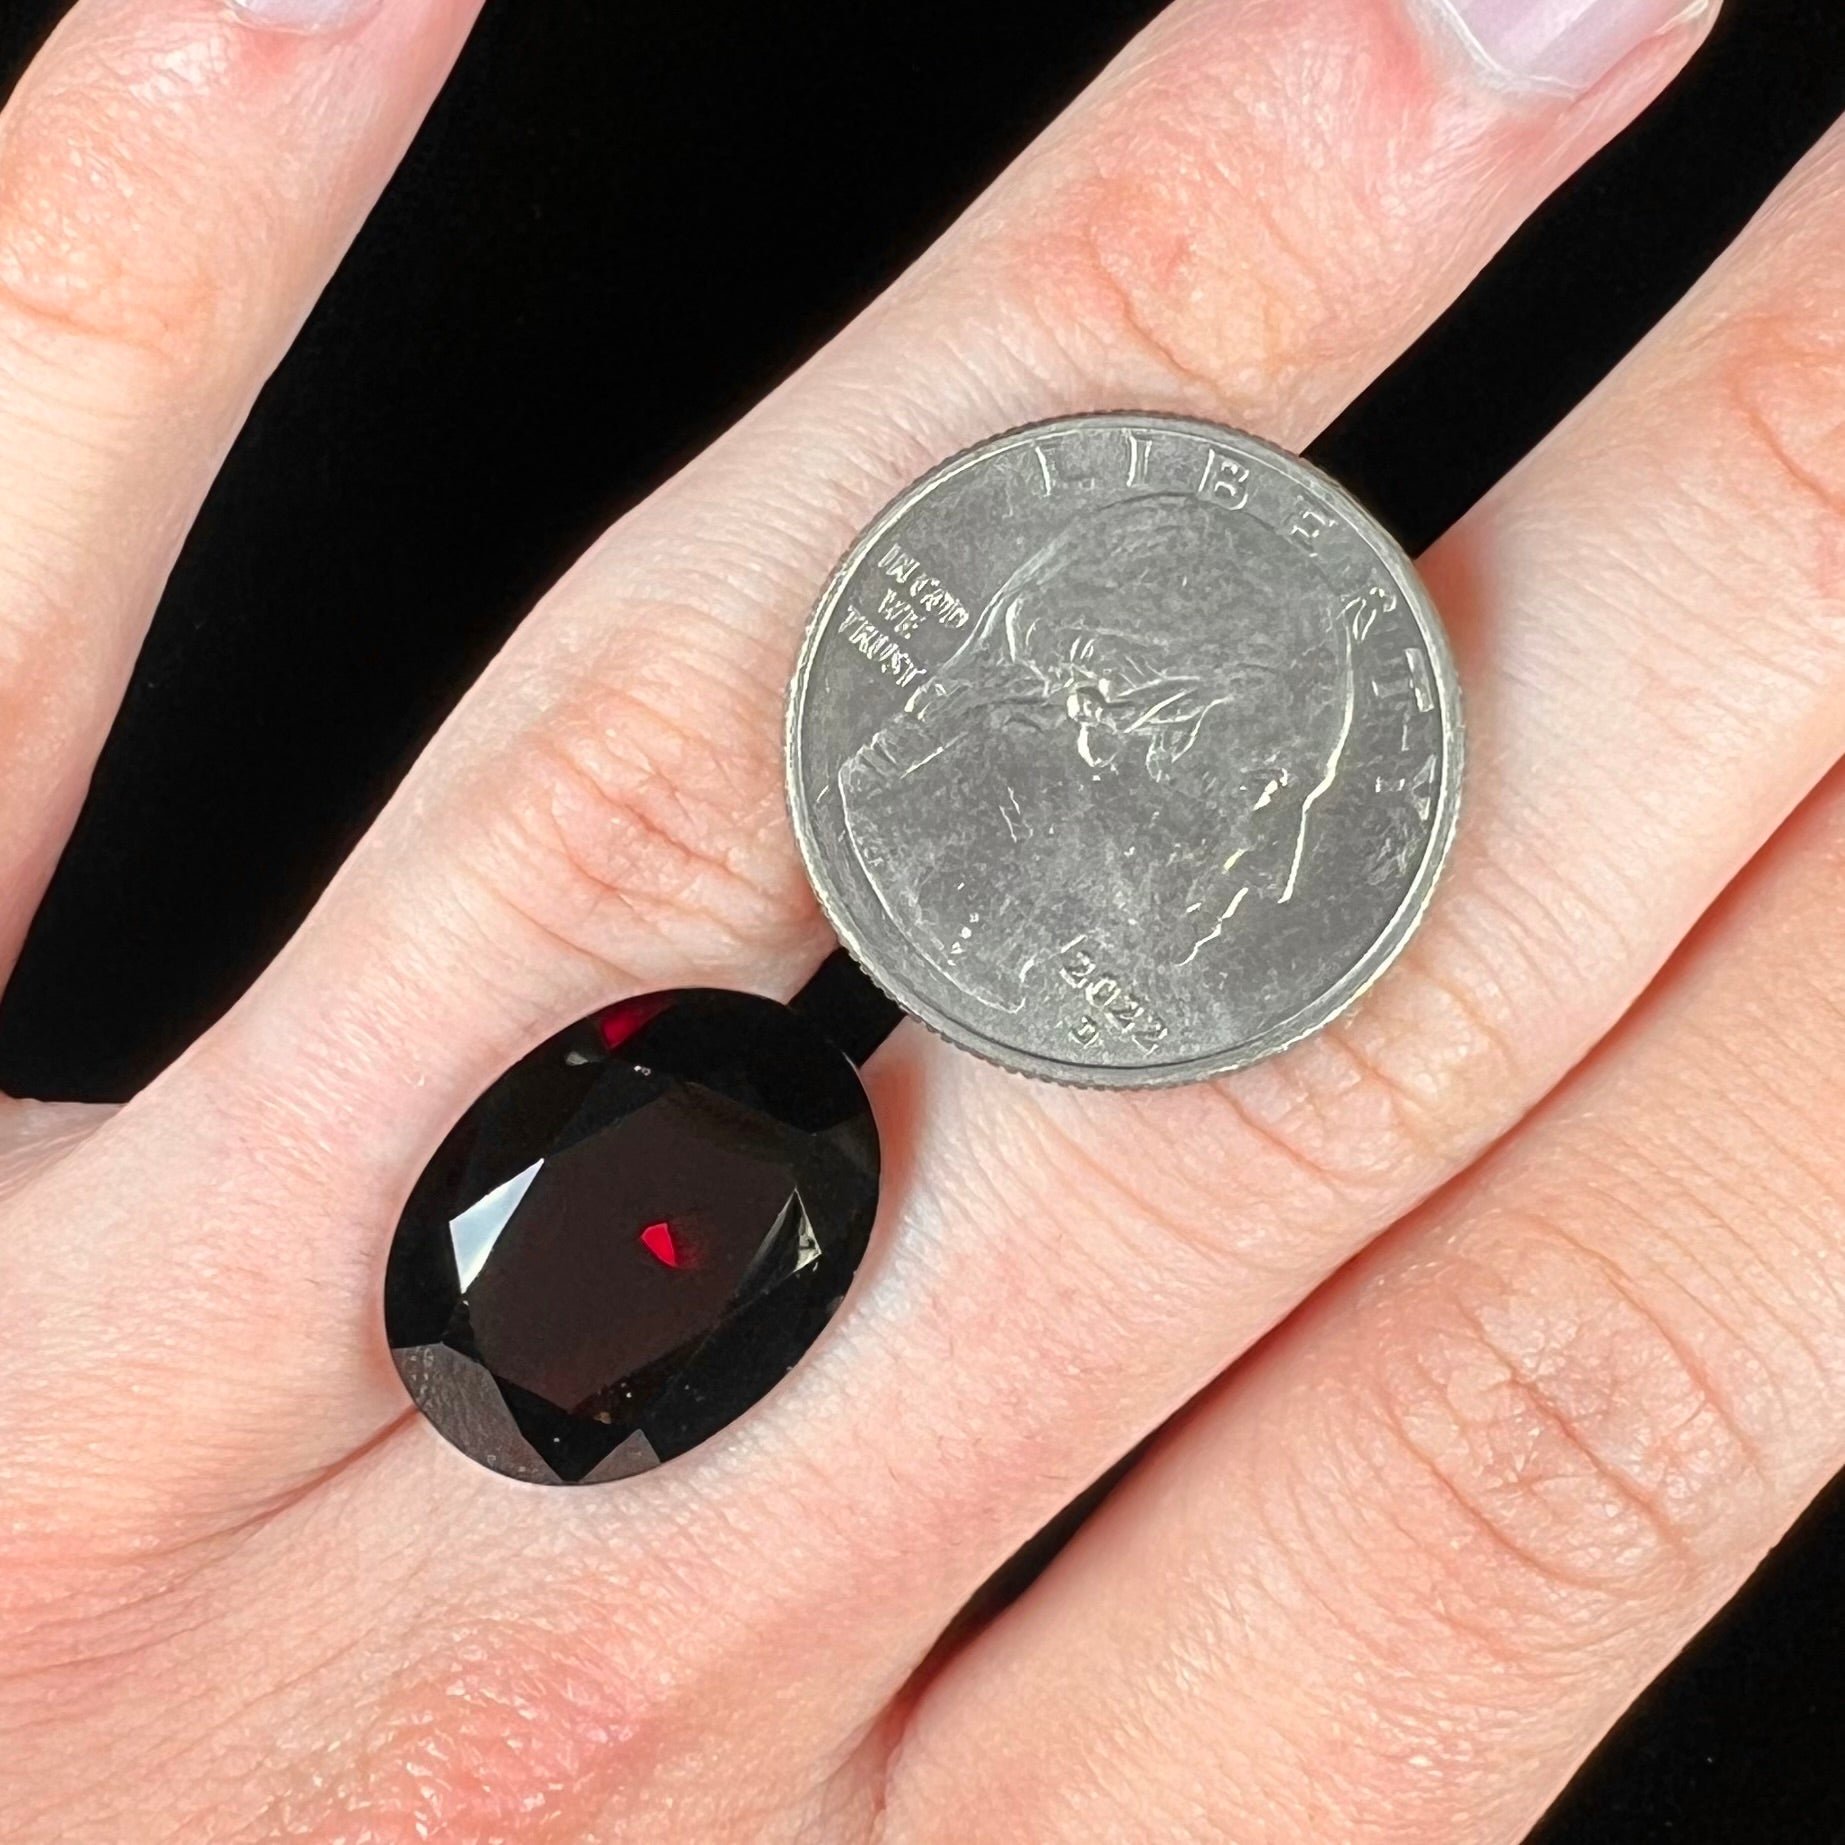 A loose, faceted oval cut pyrope garnet gemstone.  The stone is a deep, dark red color.